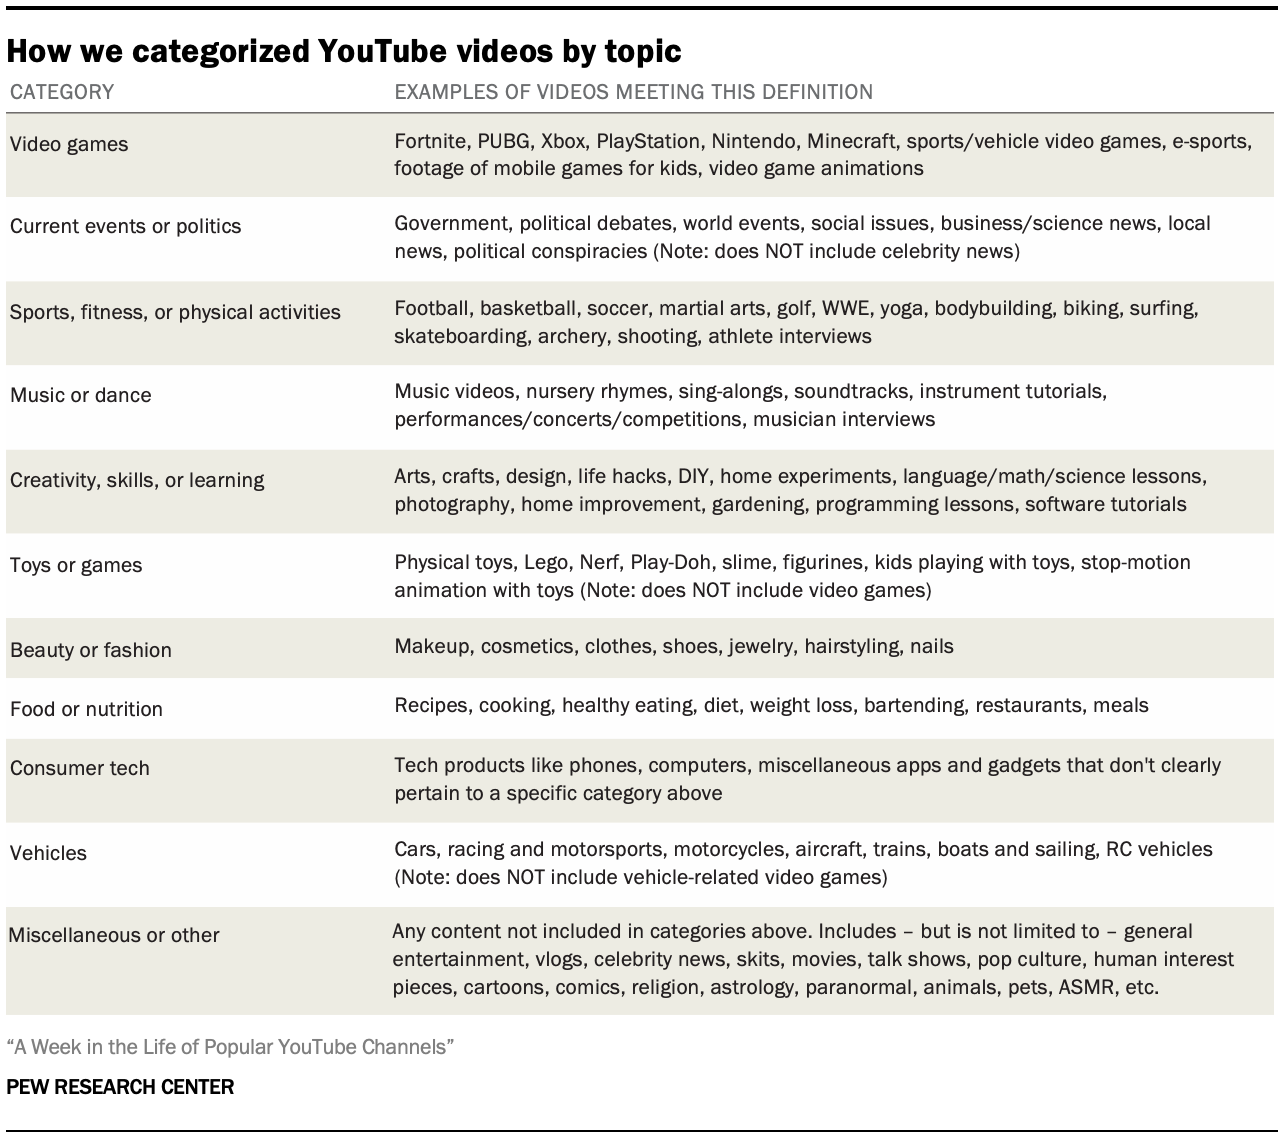 How we categorized YouTube videos by topic